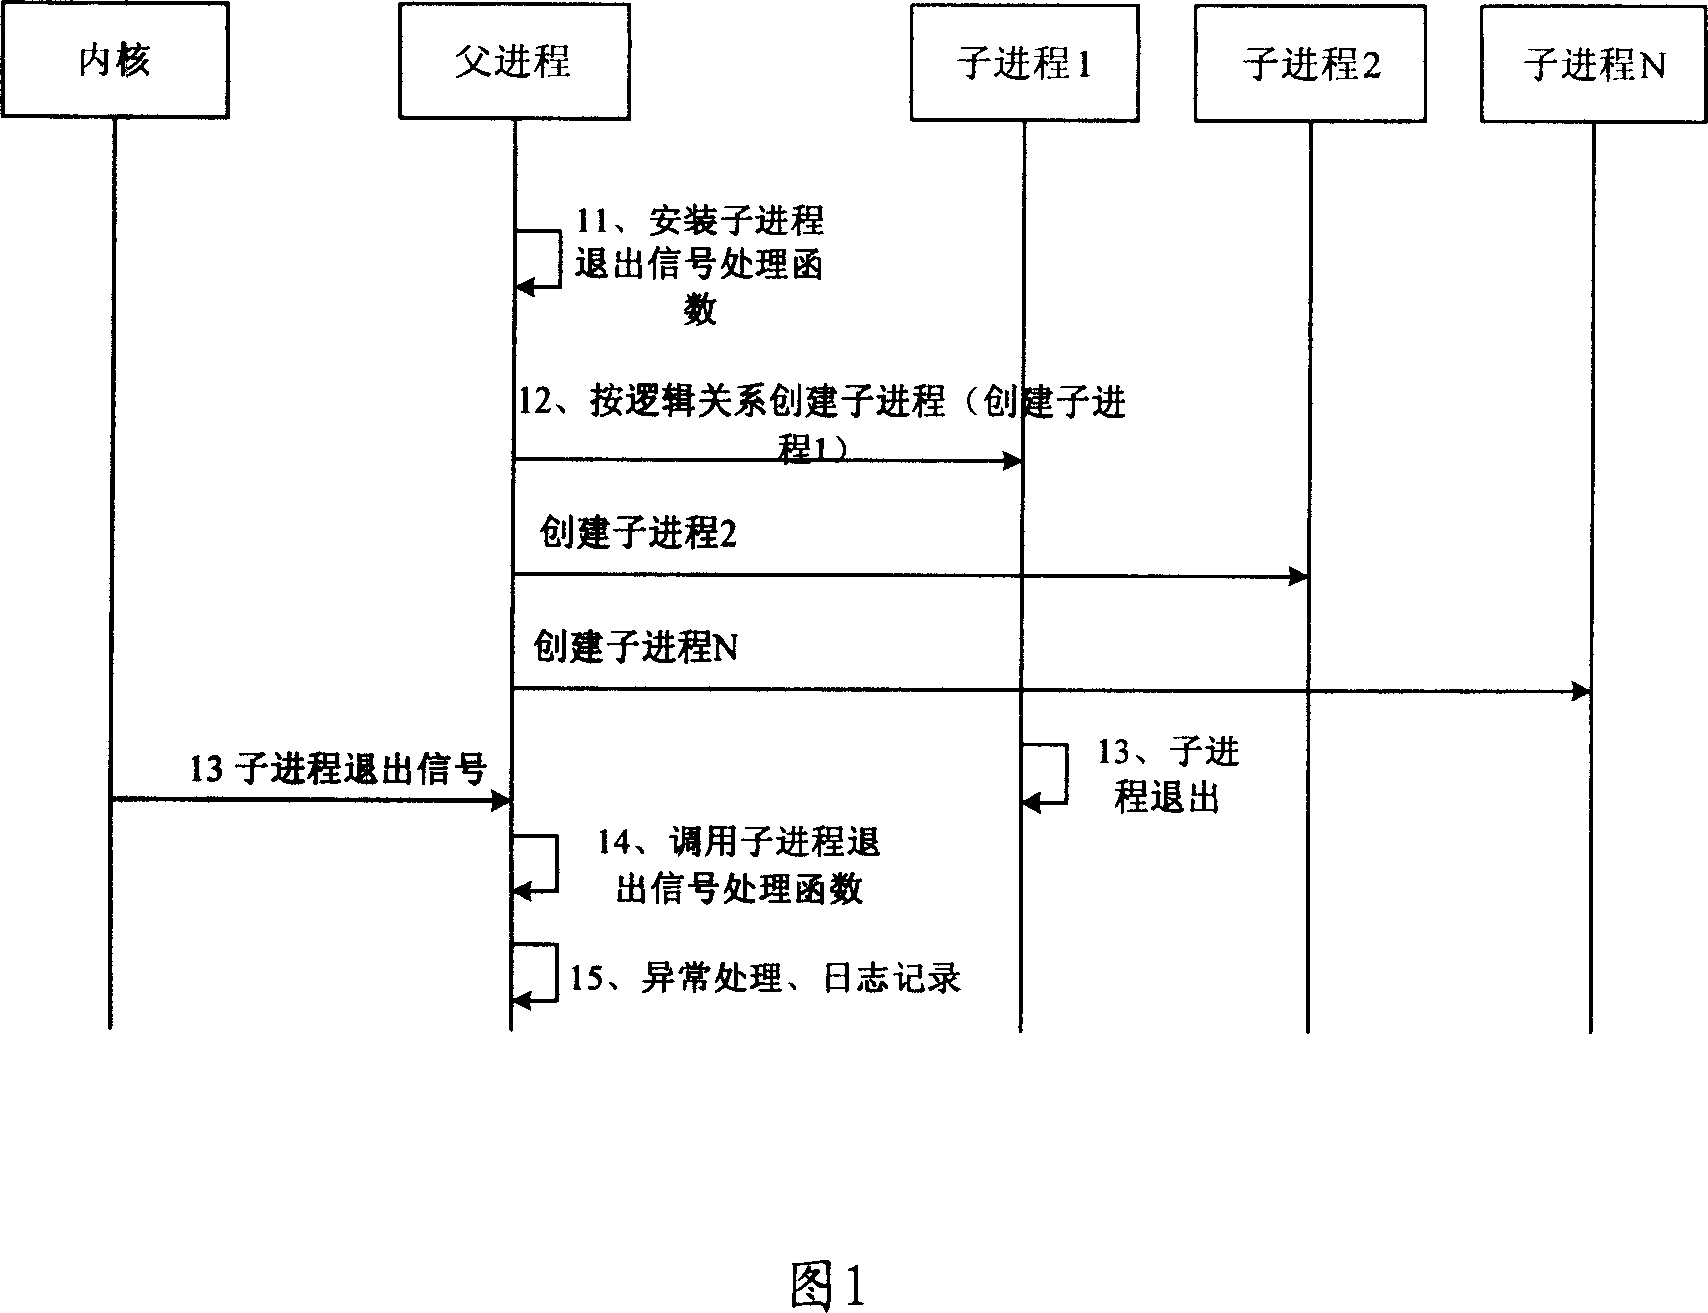 Method and system for monitoring process